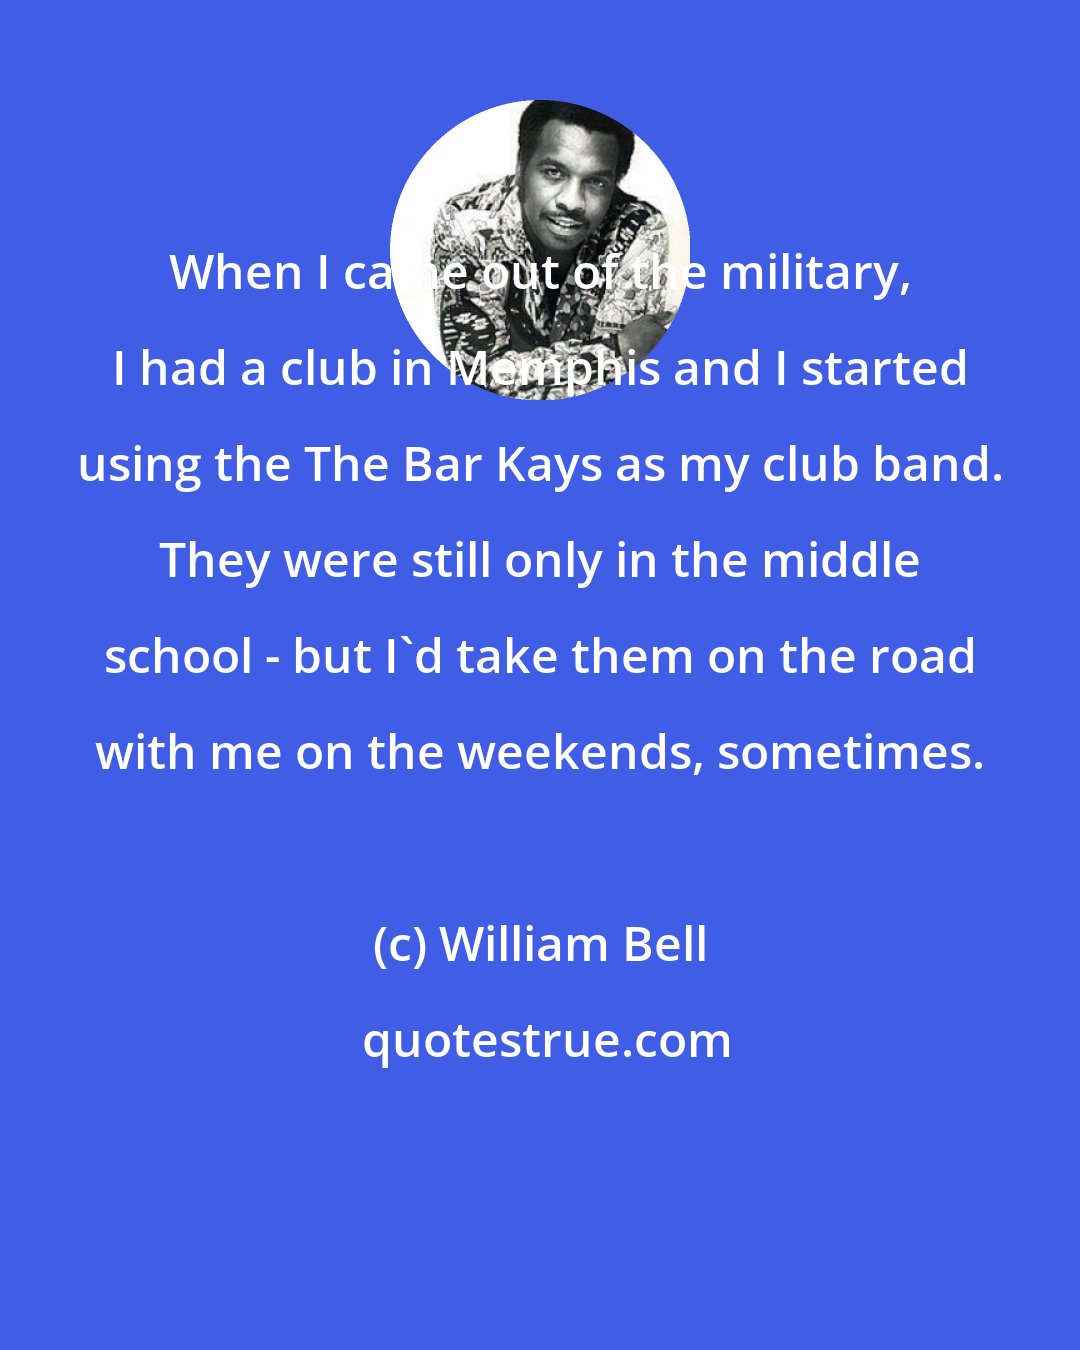 William Bell: When I came out of the military, I had a club in Memphis and I started using the The Bar Kays as my club band. They were still only in the middle school - but I'd take them on the road with me on the weekends, sometimes.